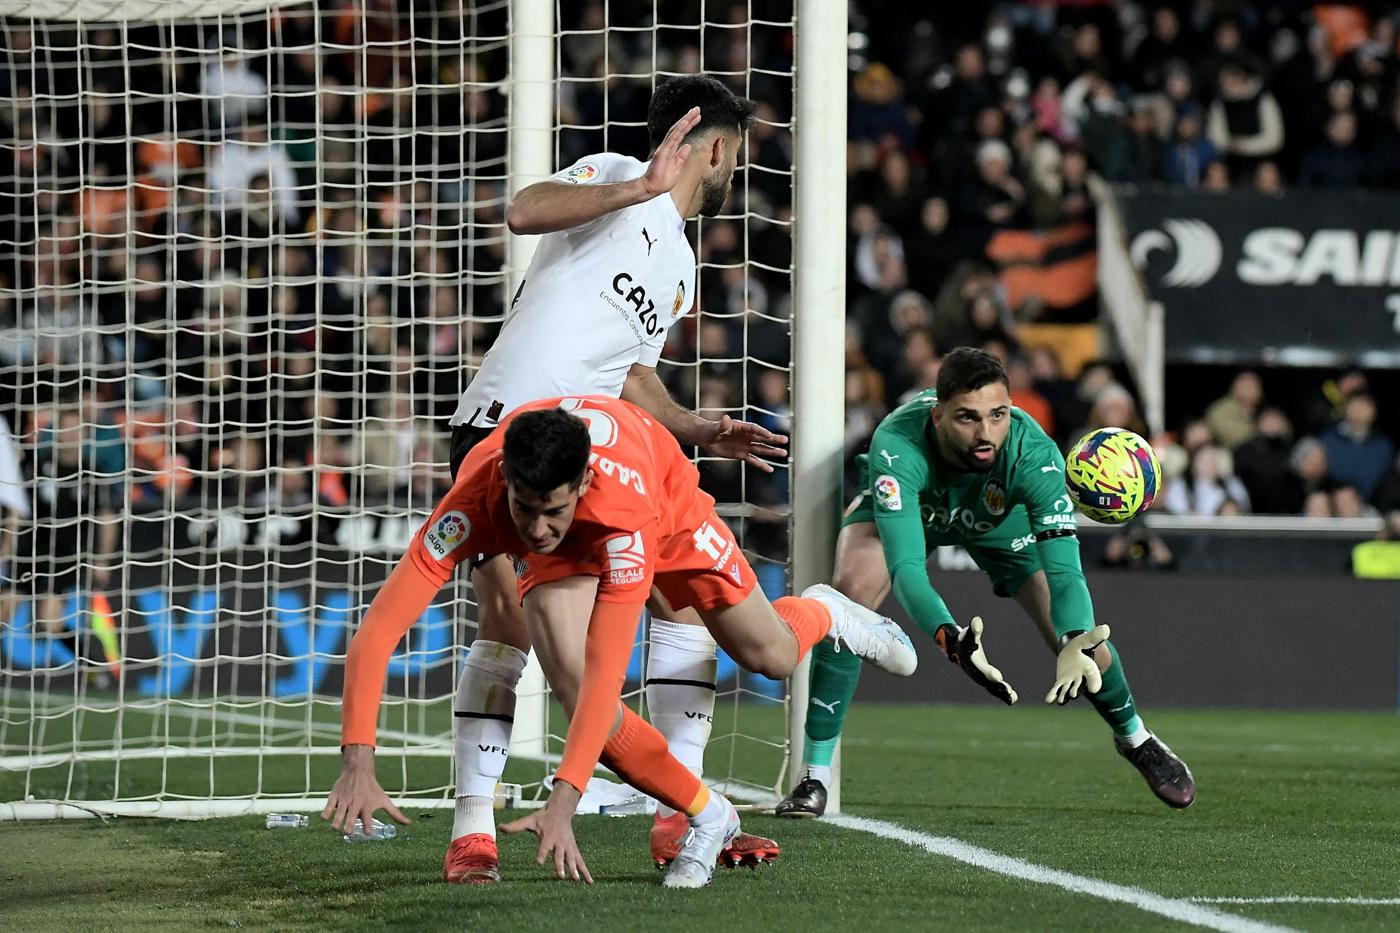 Valencia - Real S-Dad - 1:0. Spanish Championship, round 23. Match Review, Statistics